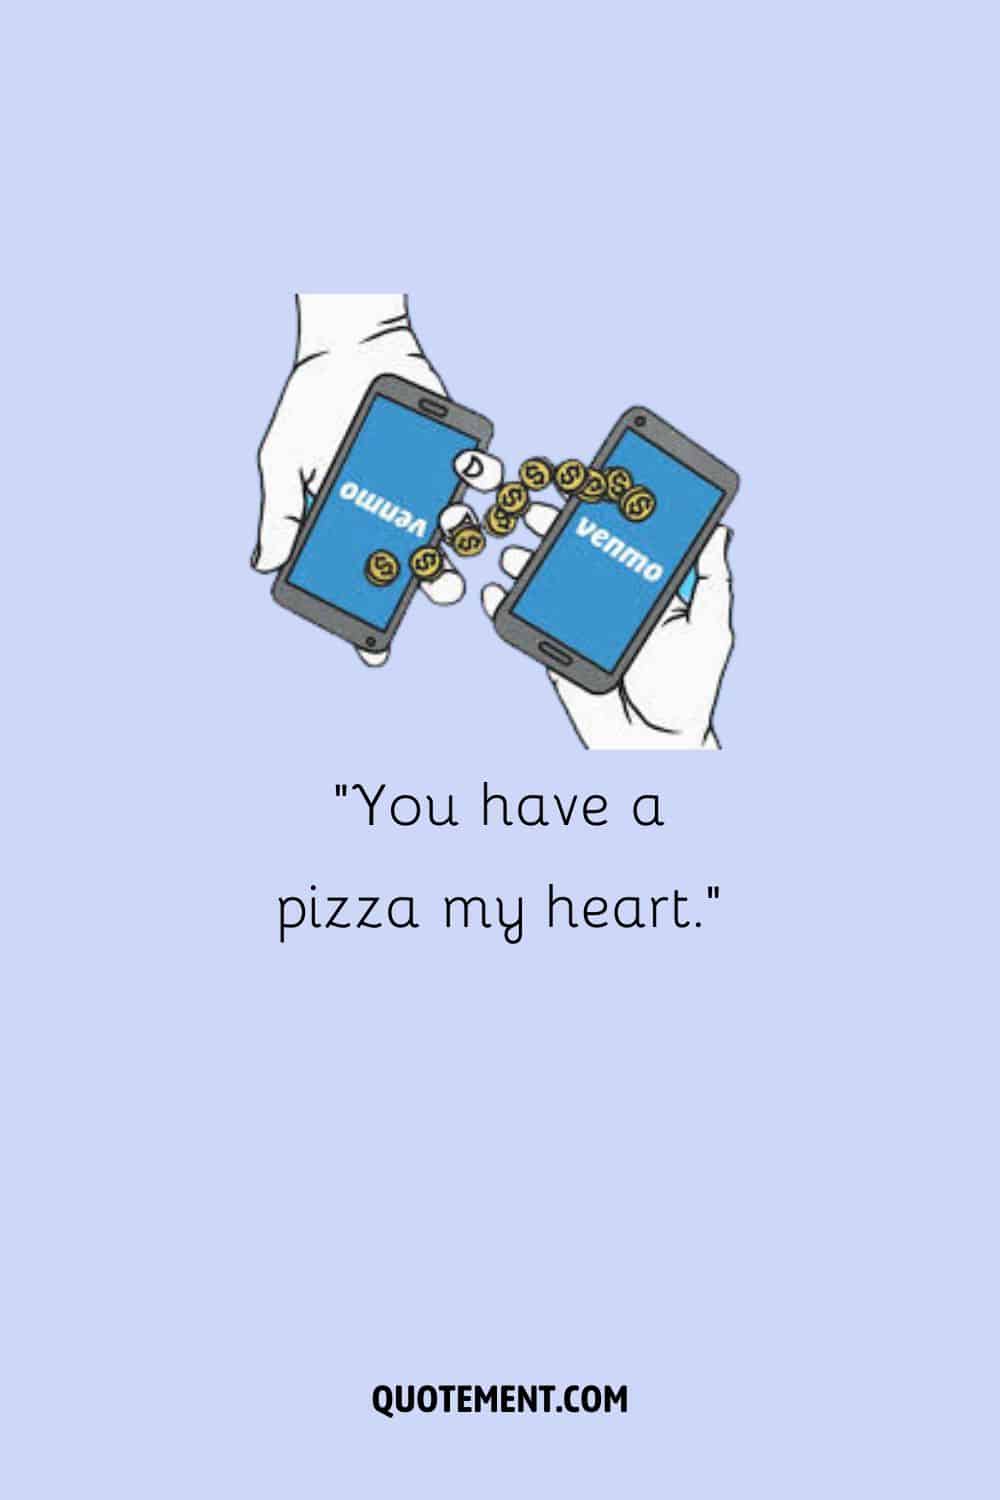 You have a pizza my heart.